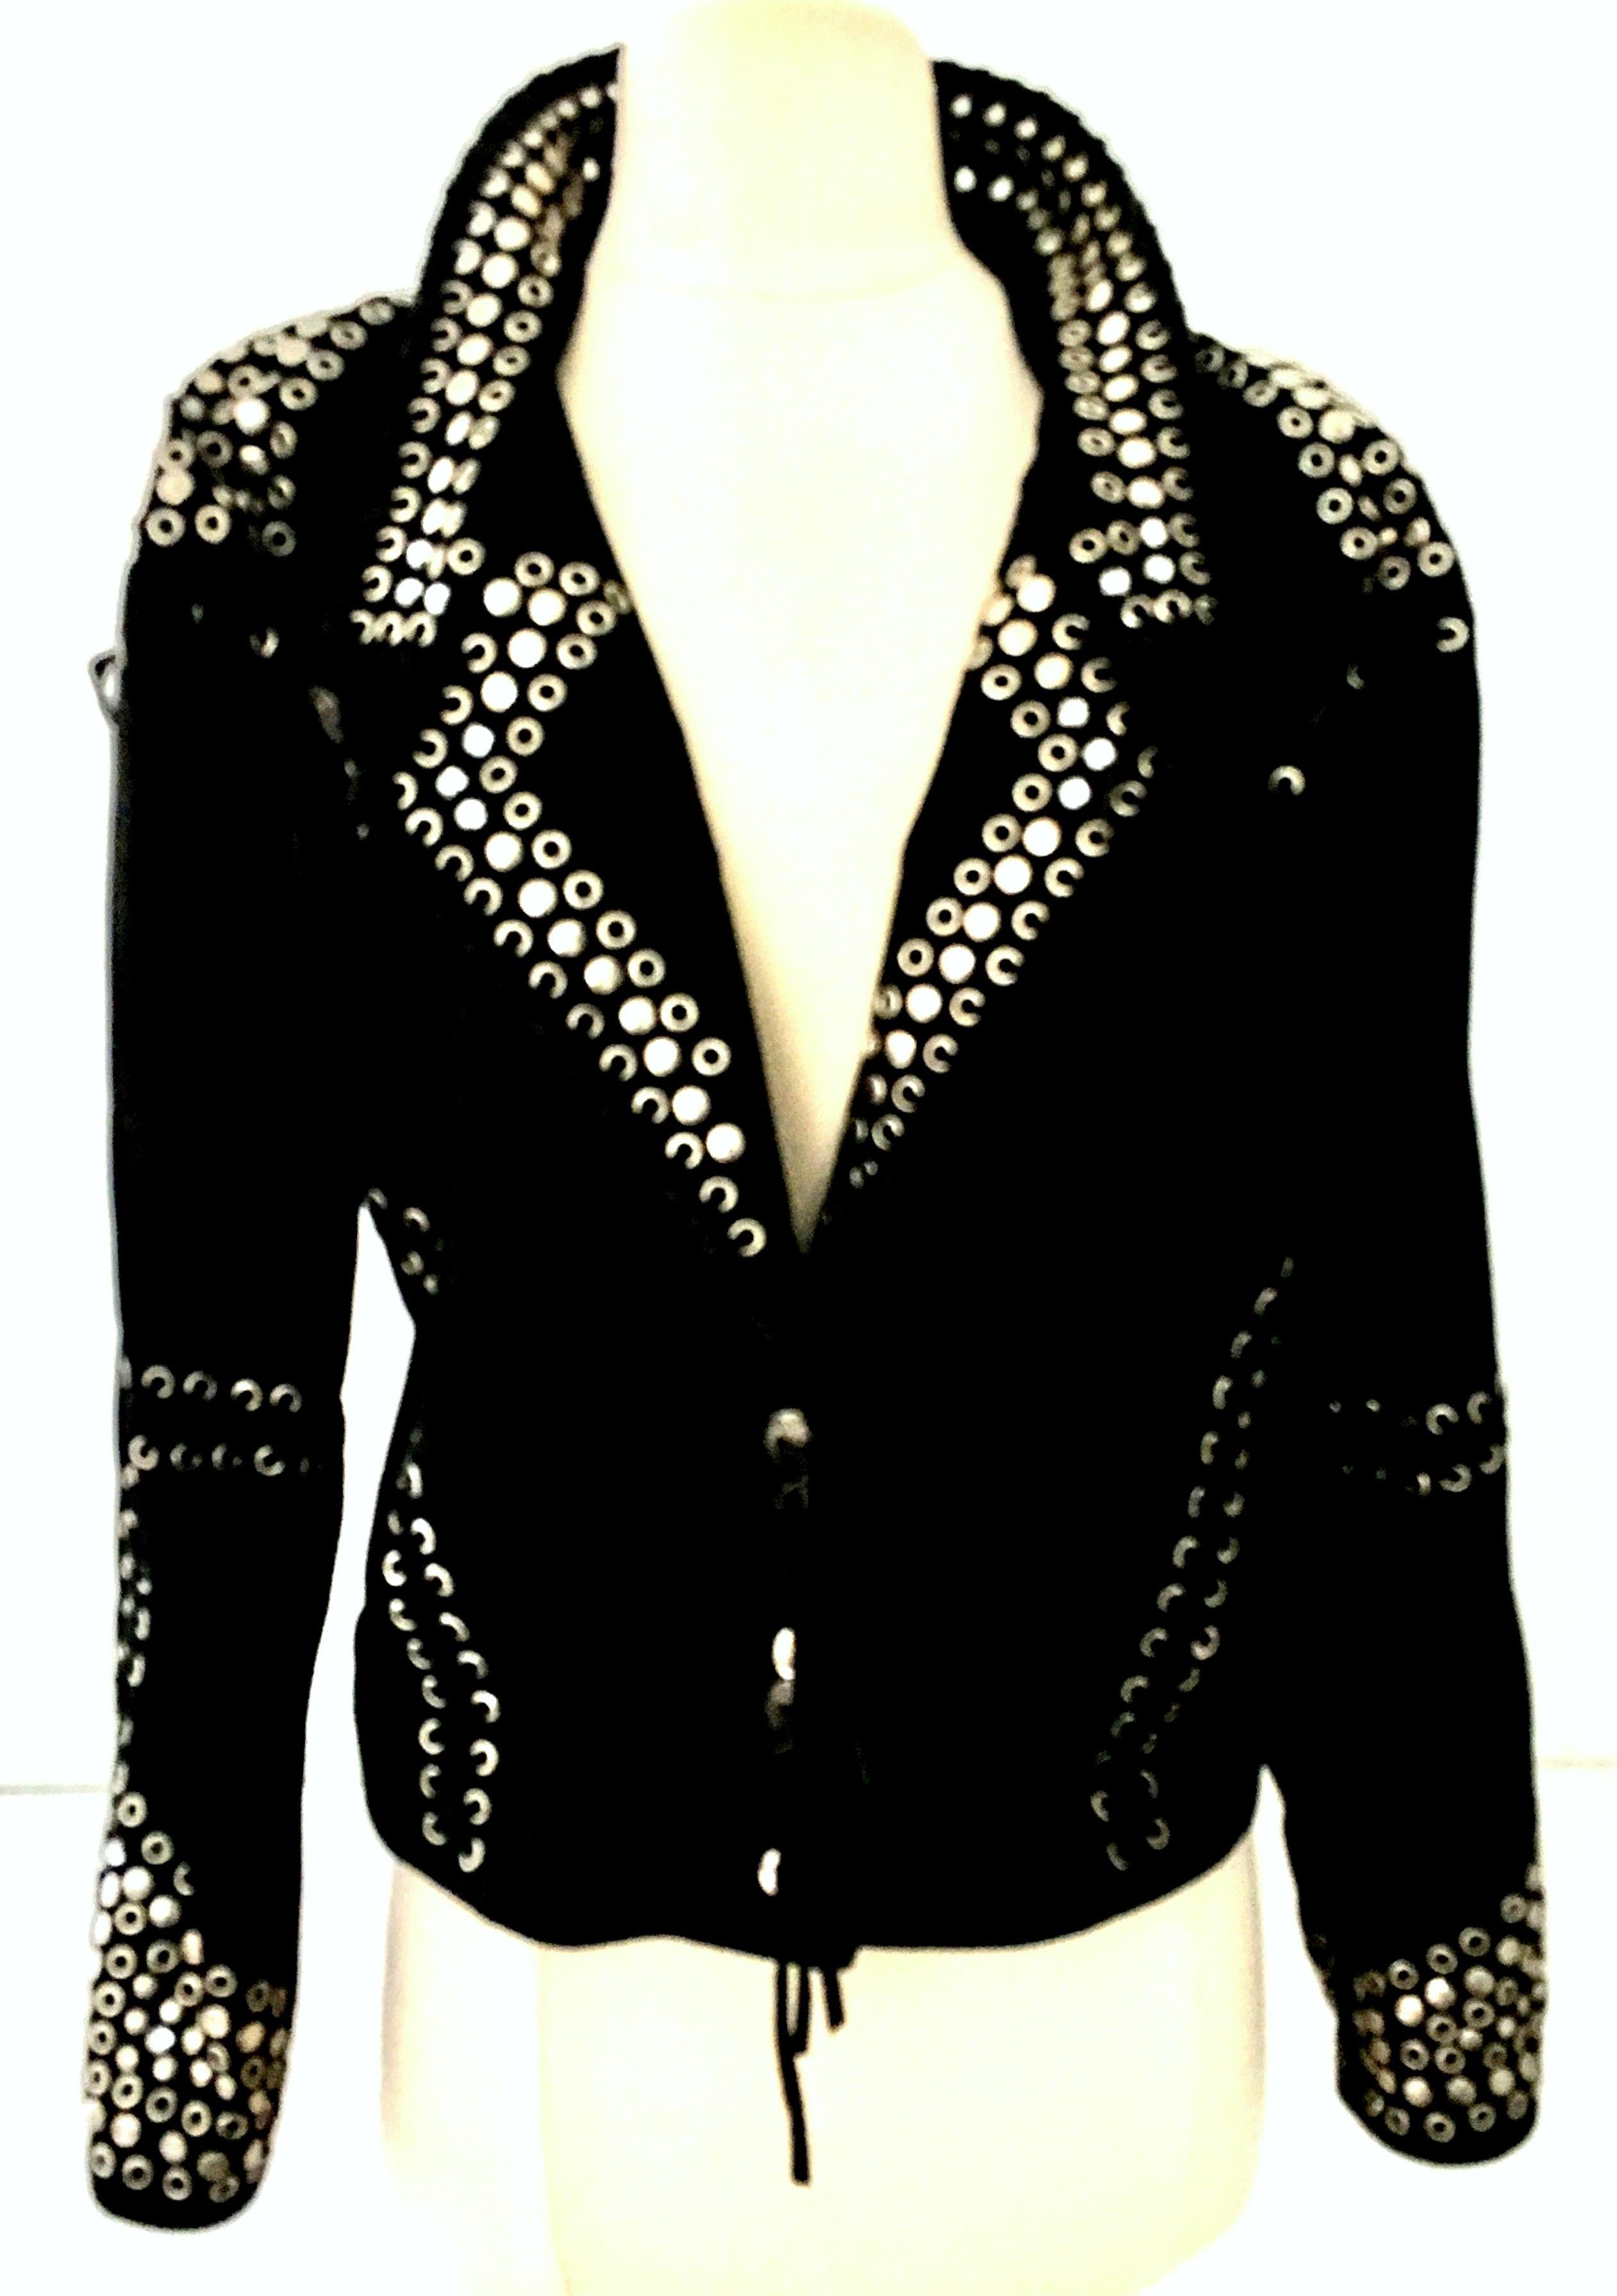 20th Century Italian black leather suede & chrome stud  Motorcycle Jacket Features soft Italian leather suede adorned with silver chrome stud, rivets and crystal clear rhinestones. There are silver etched Navajo style ornaments with braided suede